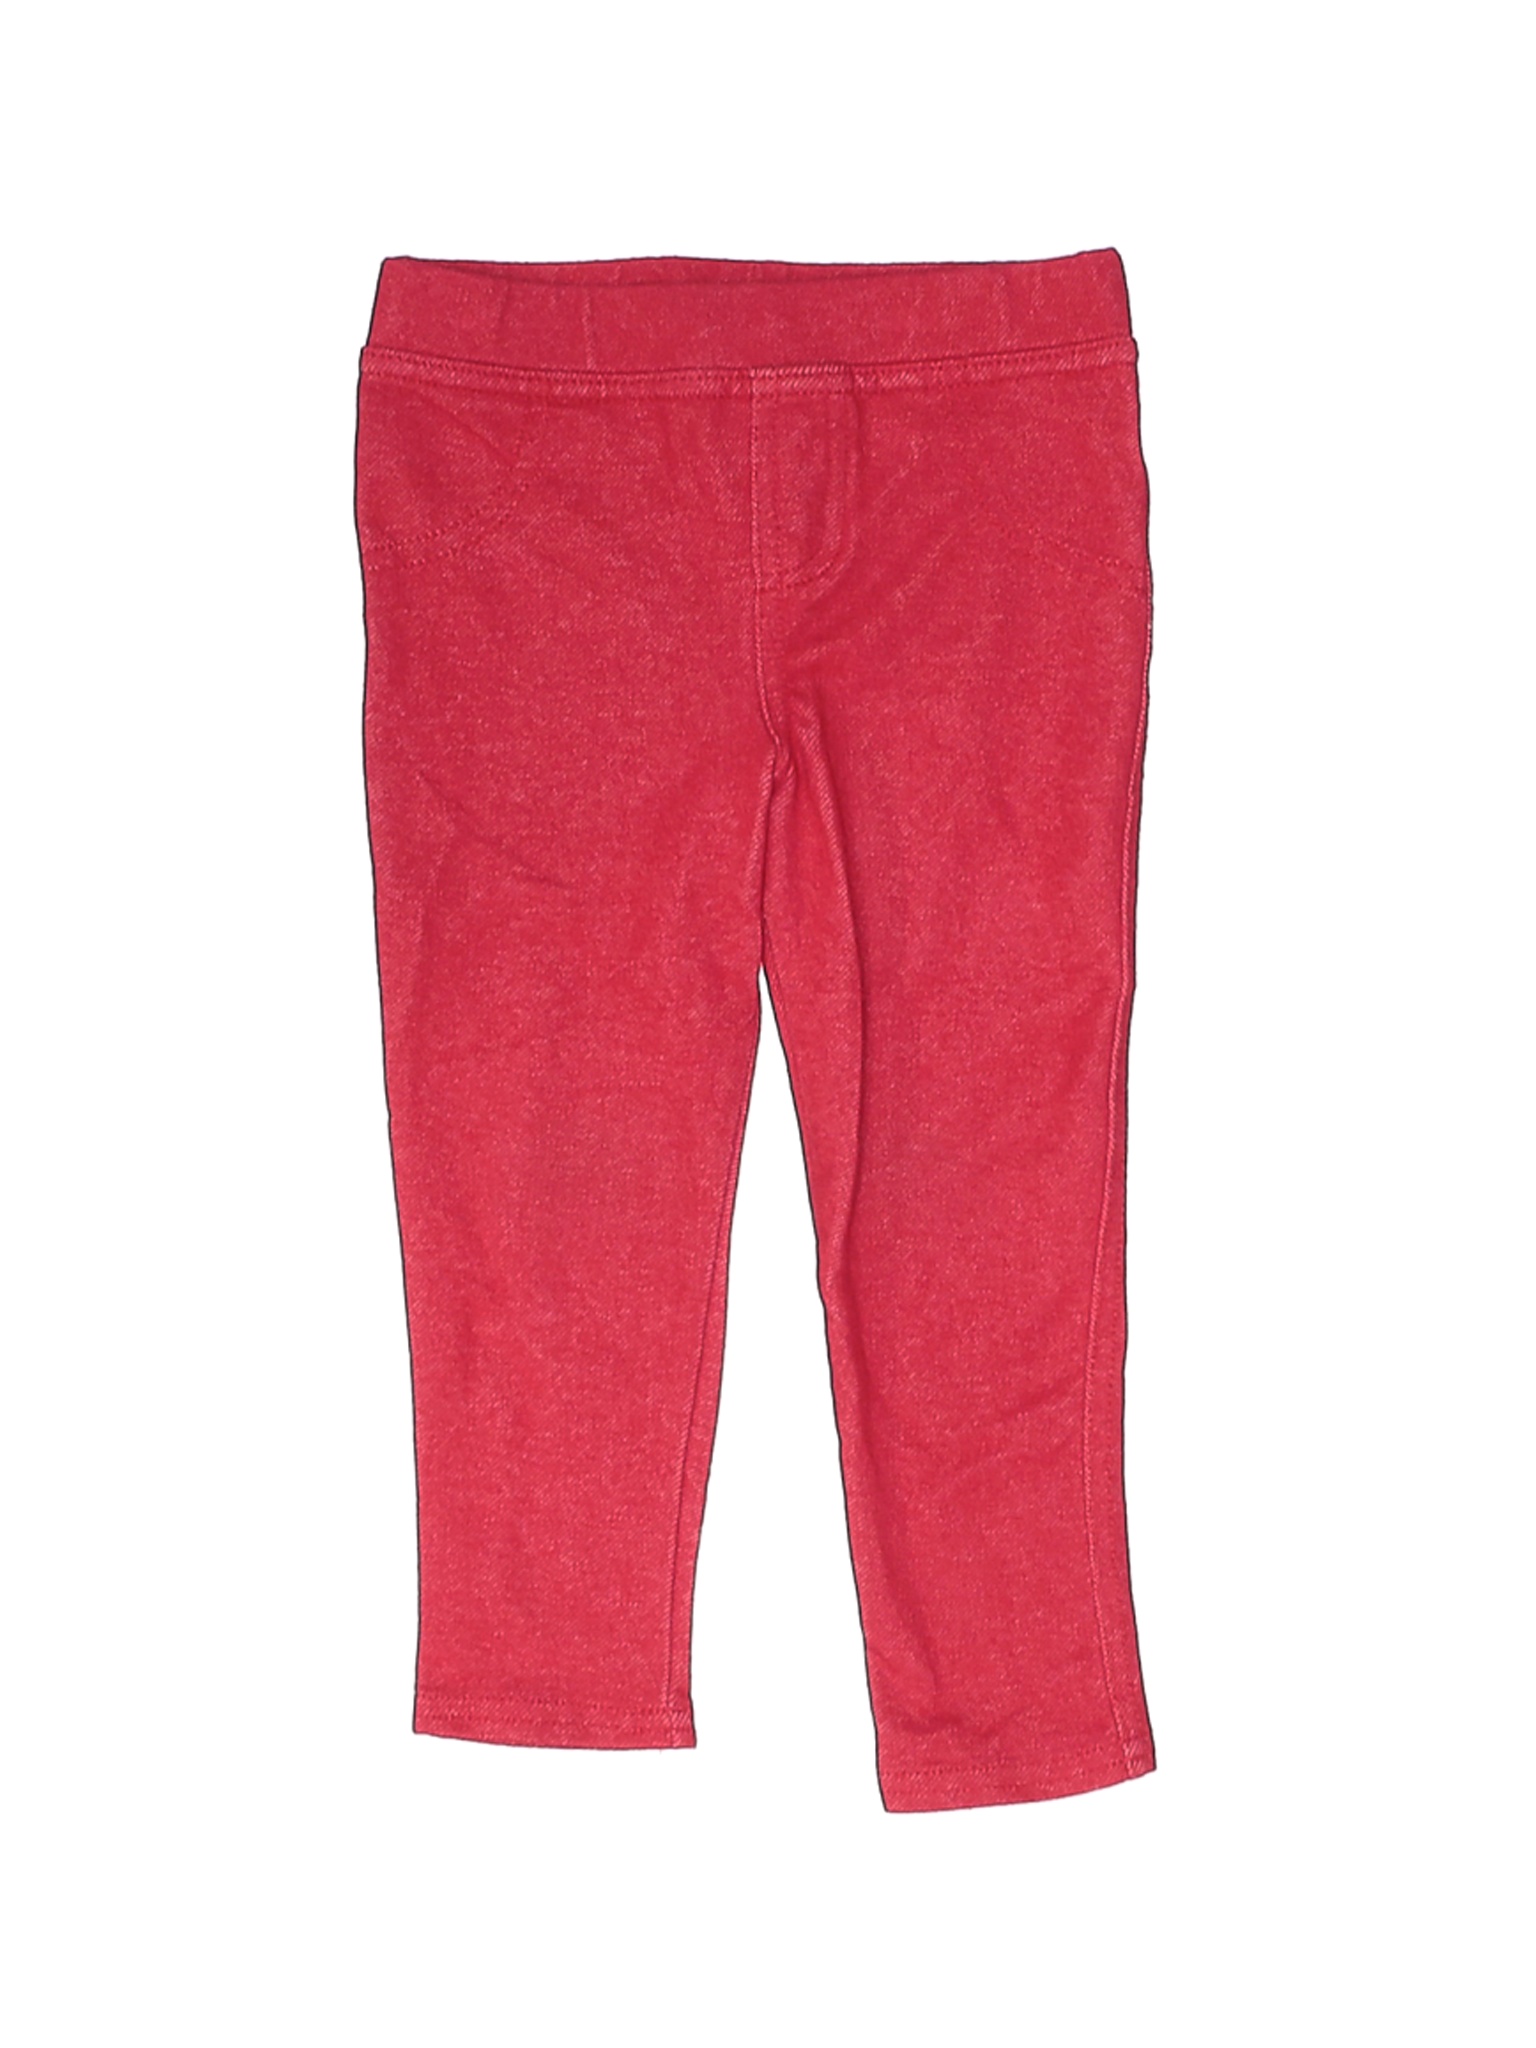 Unbranded Girls Red Casual Pants 24 Months | eBay